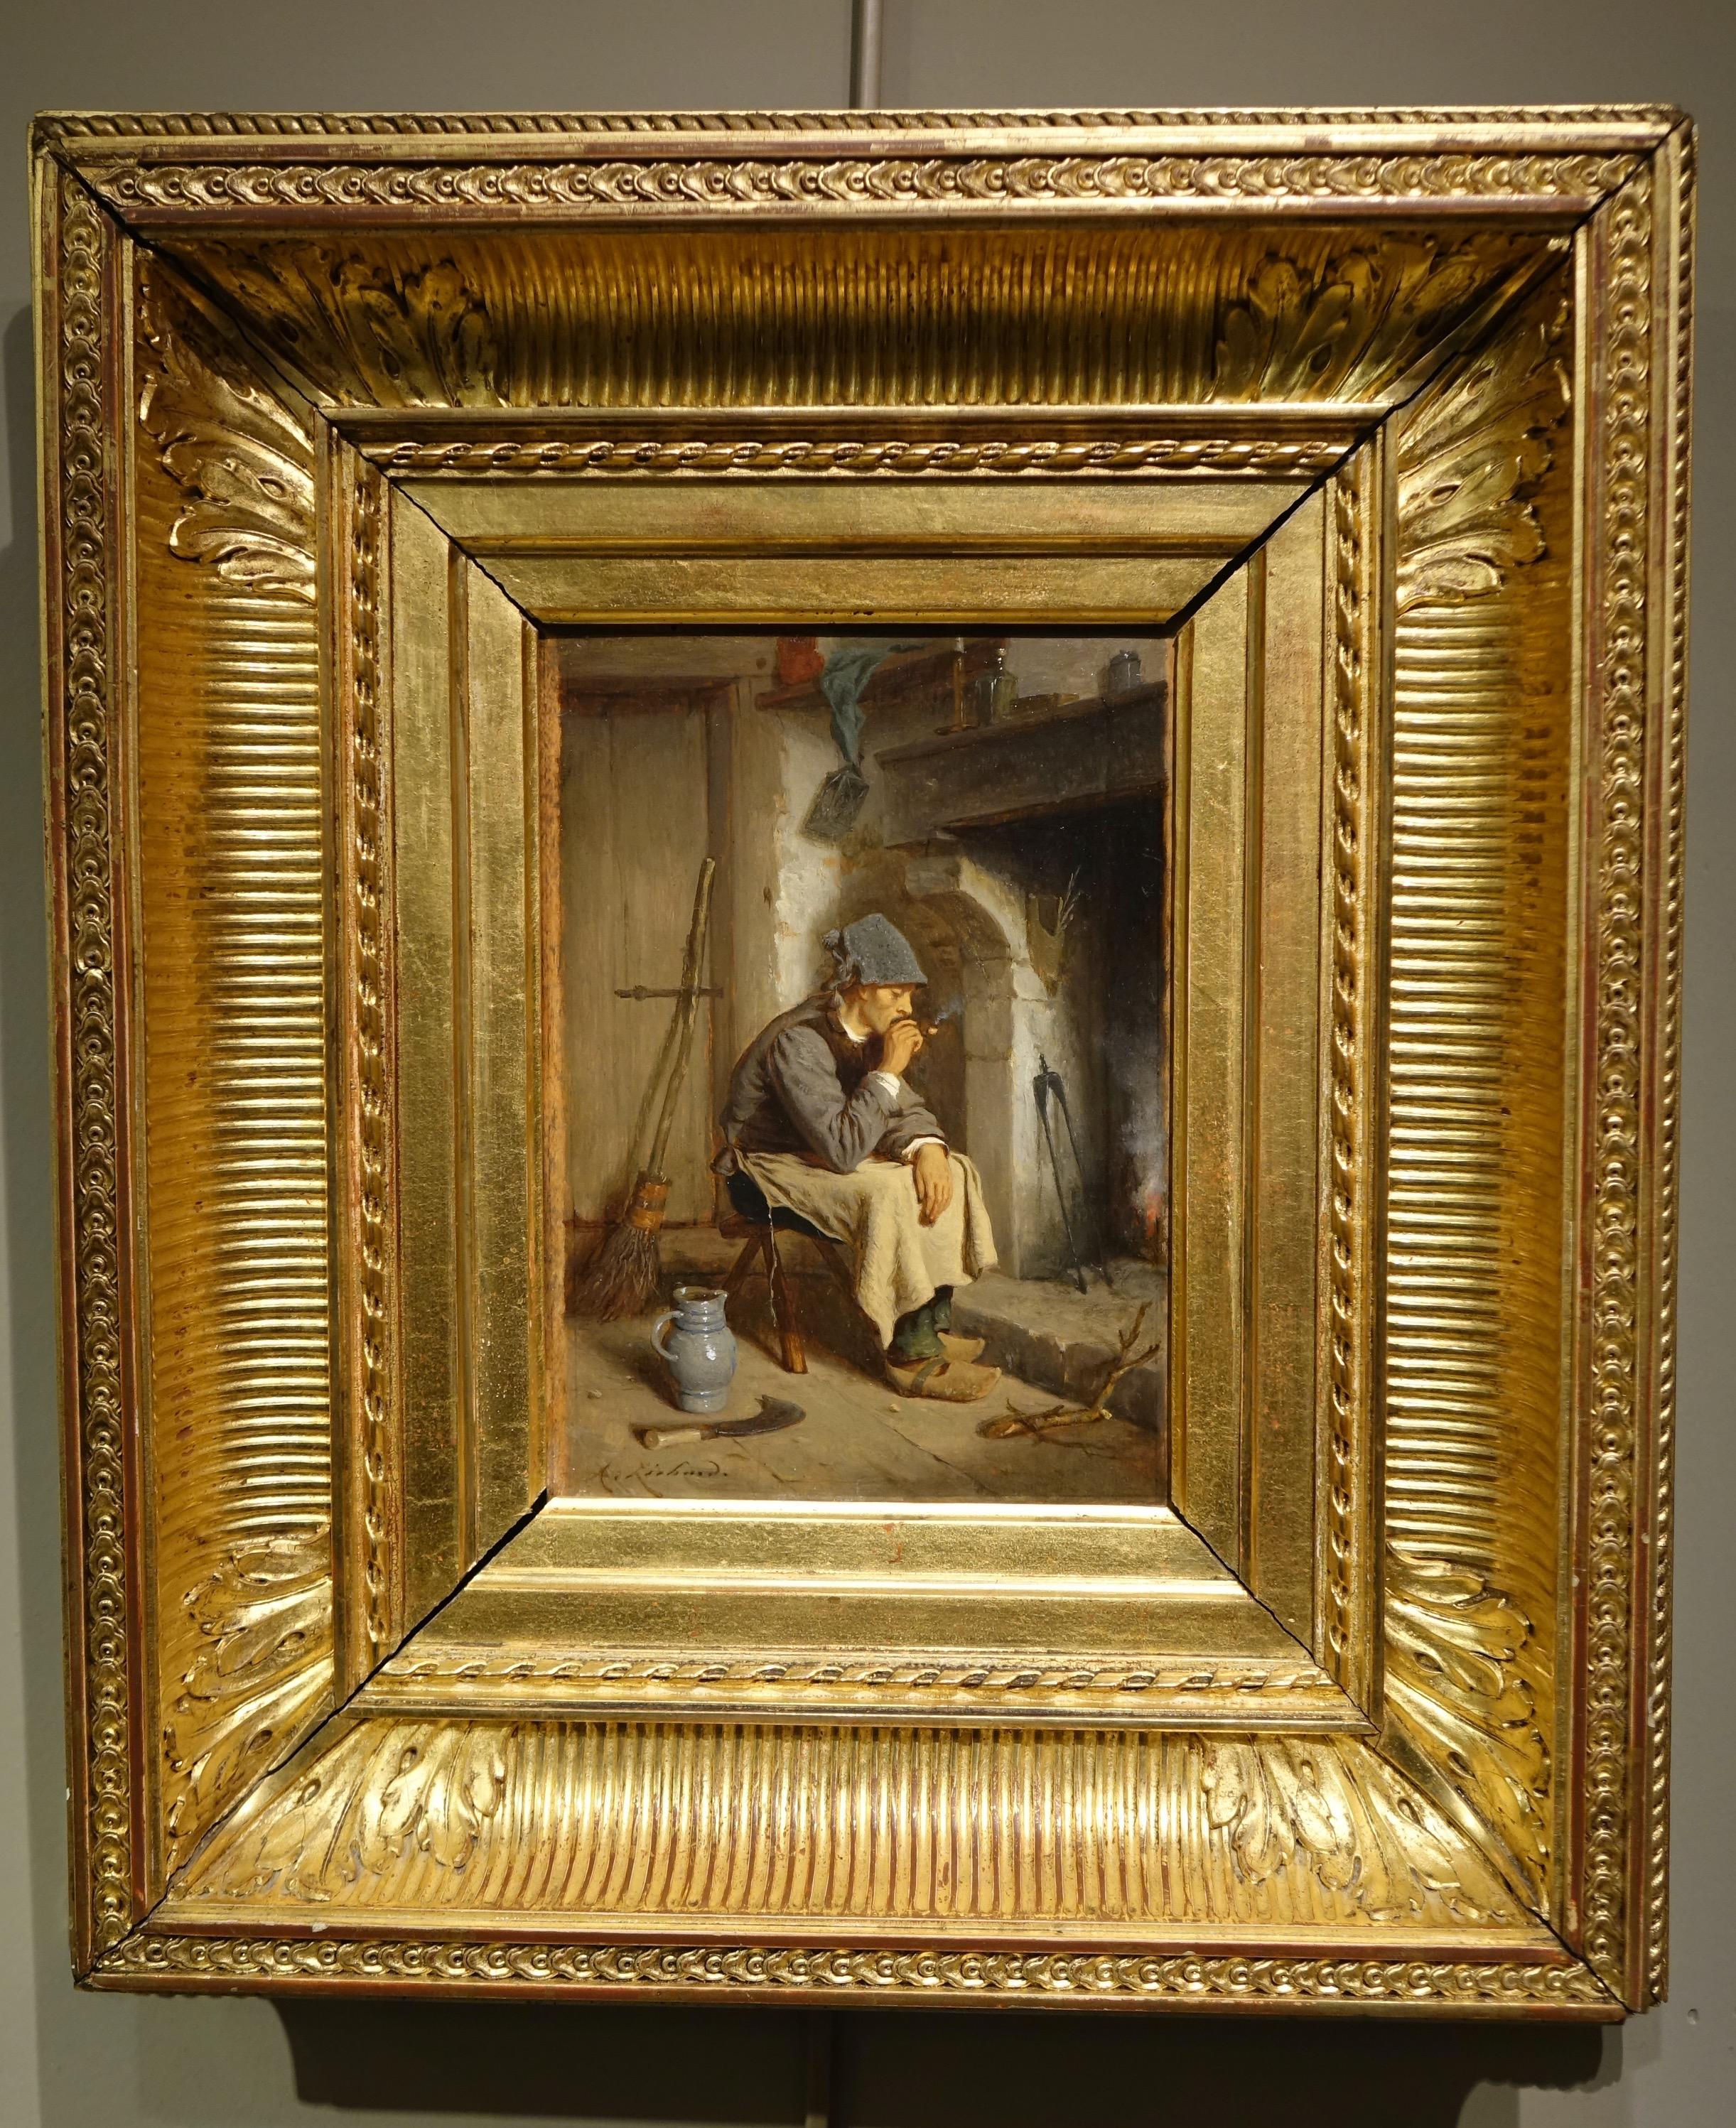 Napoleon III Man Smoking A Pipe In Front Of A Chimney by Antoine Richard 1822-1891 For Sale